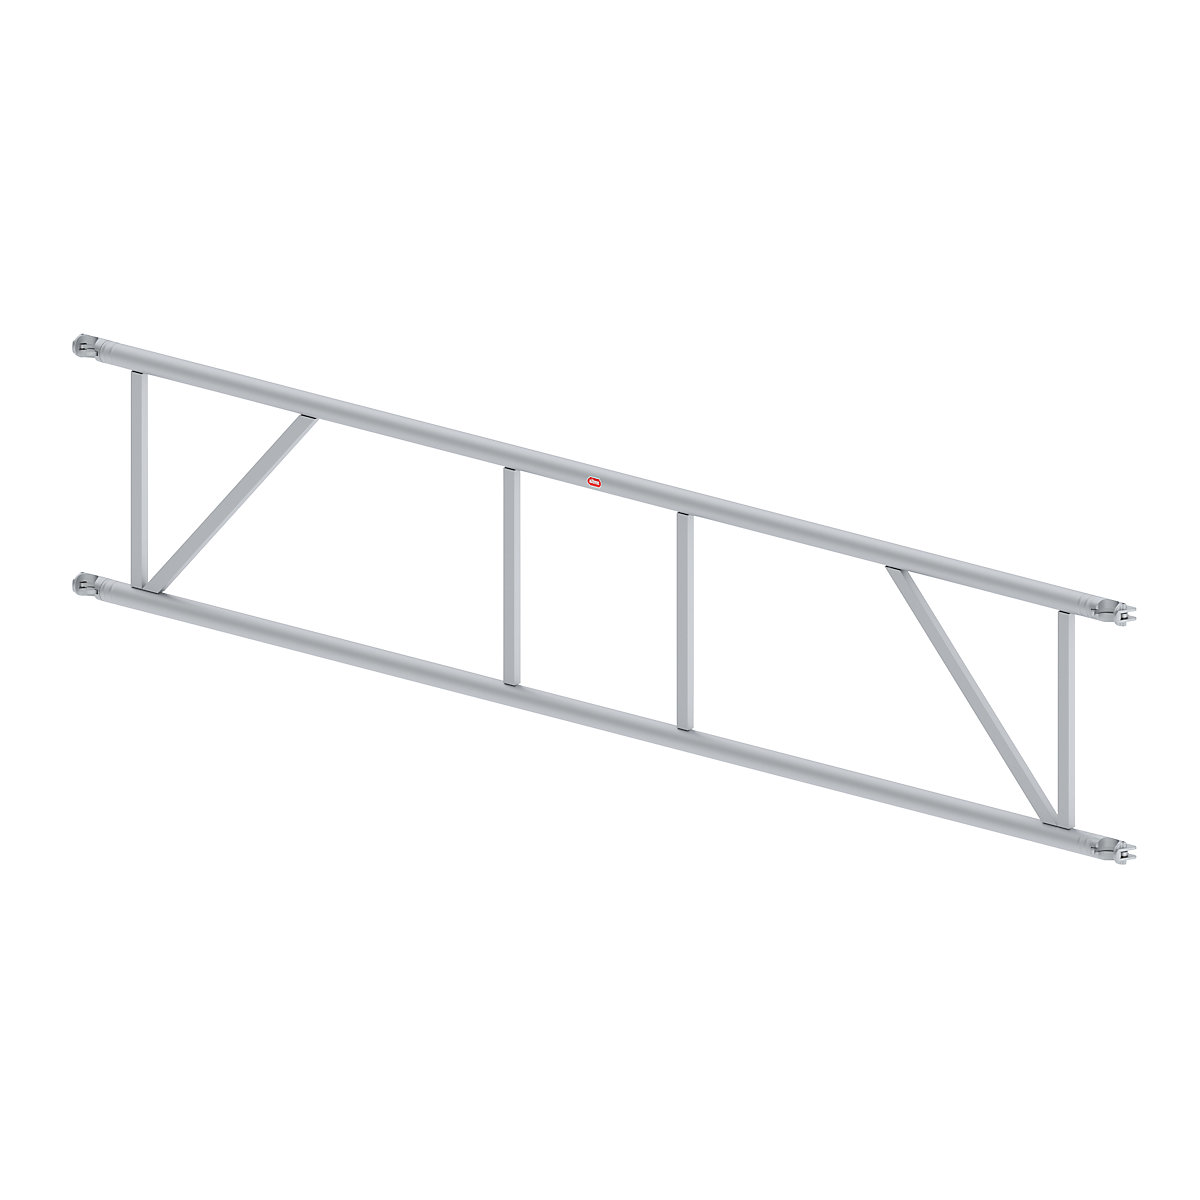 Double guardrail strut – Altrex, for RS TOWER 5 series mobile access towers, for width 3.05 m-3